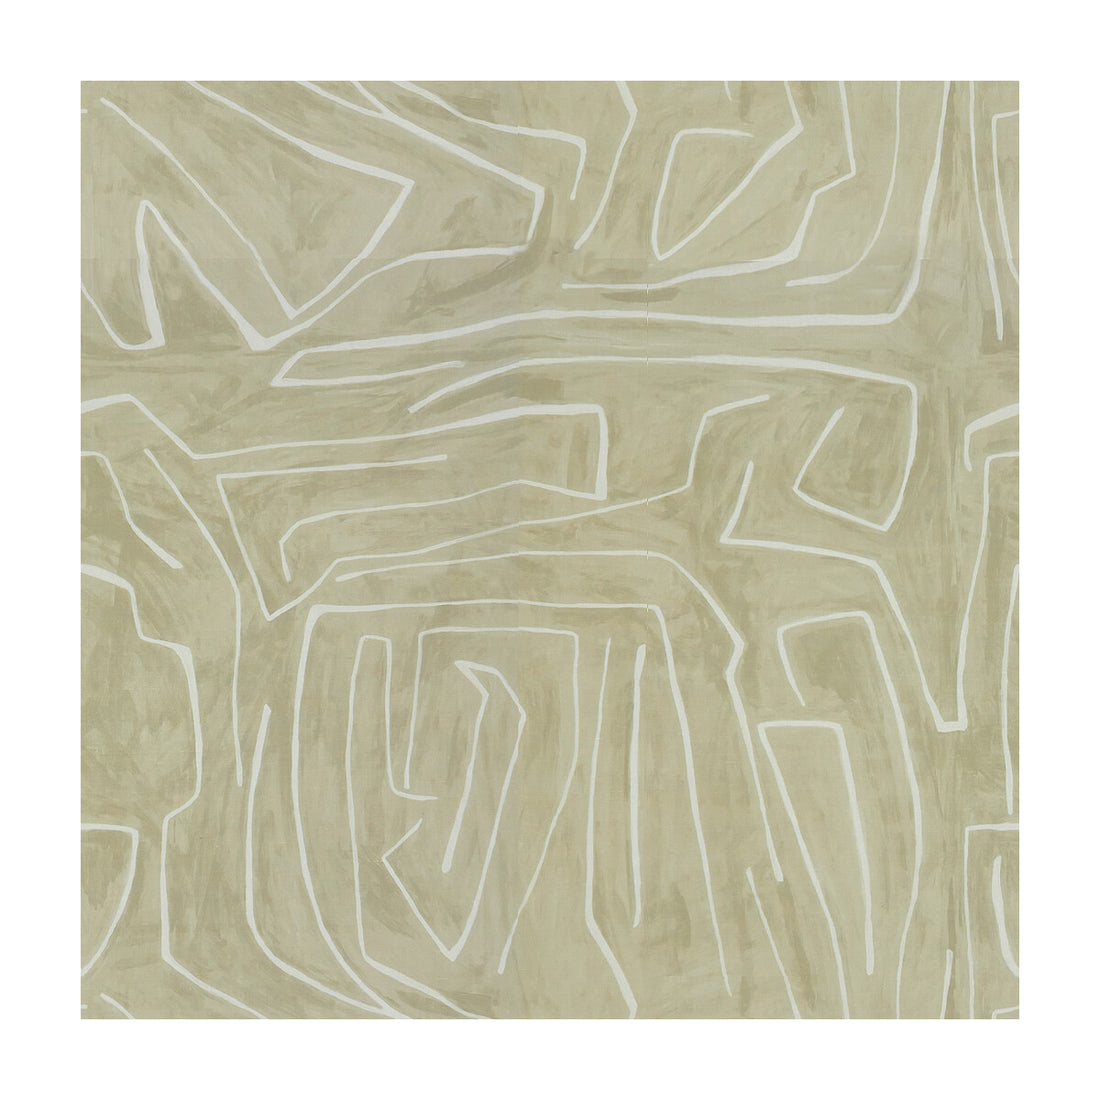 Graffito fabric in beige/ivory color - pattern GWF-3530.16.0 - by Lee Jofa Modern in the Kelly Wearstler III collection